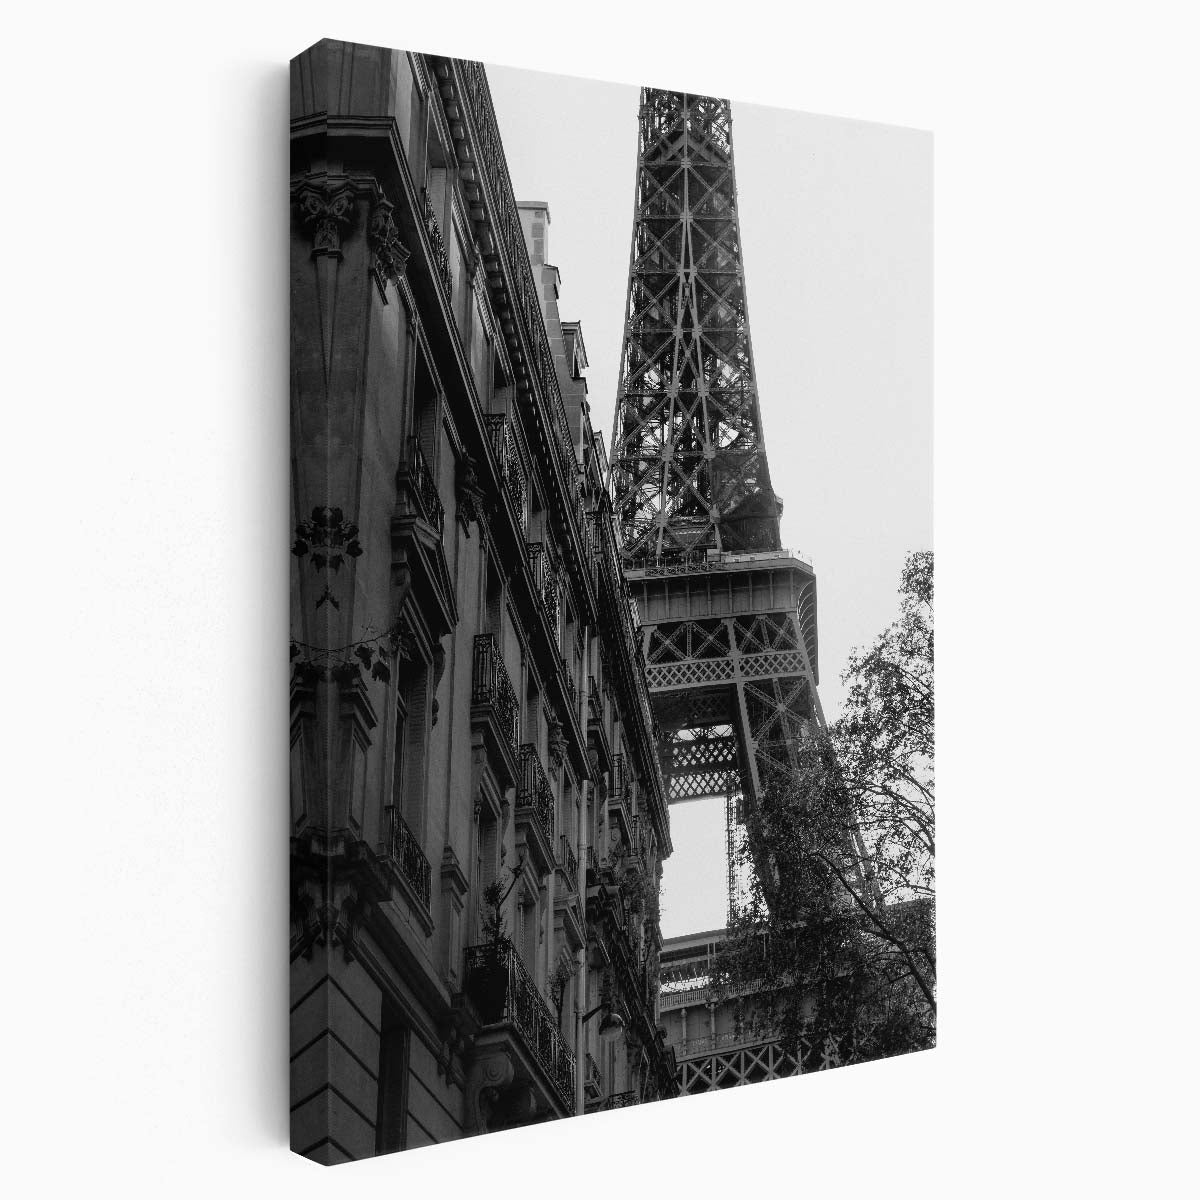 Paris Eiffel Tower Monochrome Photography, Iconic Urban Cityscape Wall Art by Luxuriance Designs, made in USA